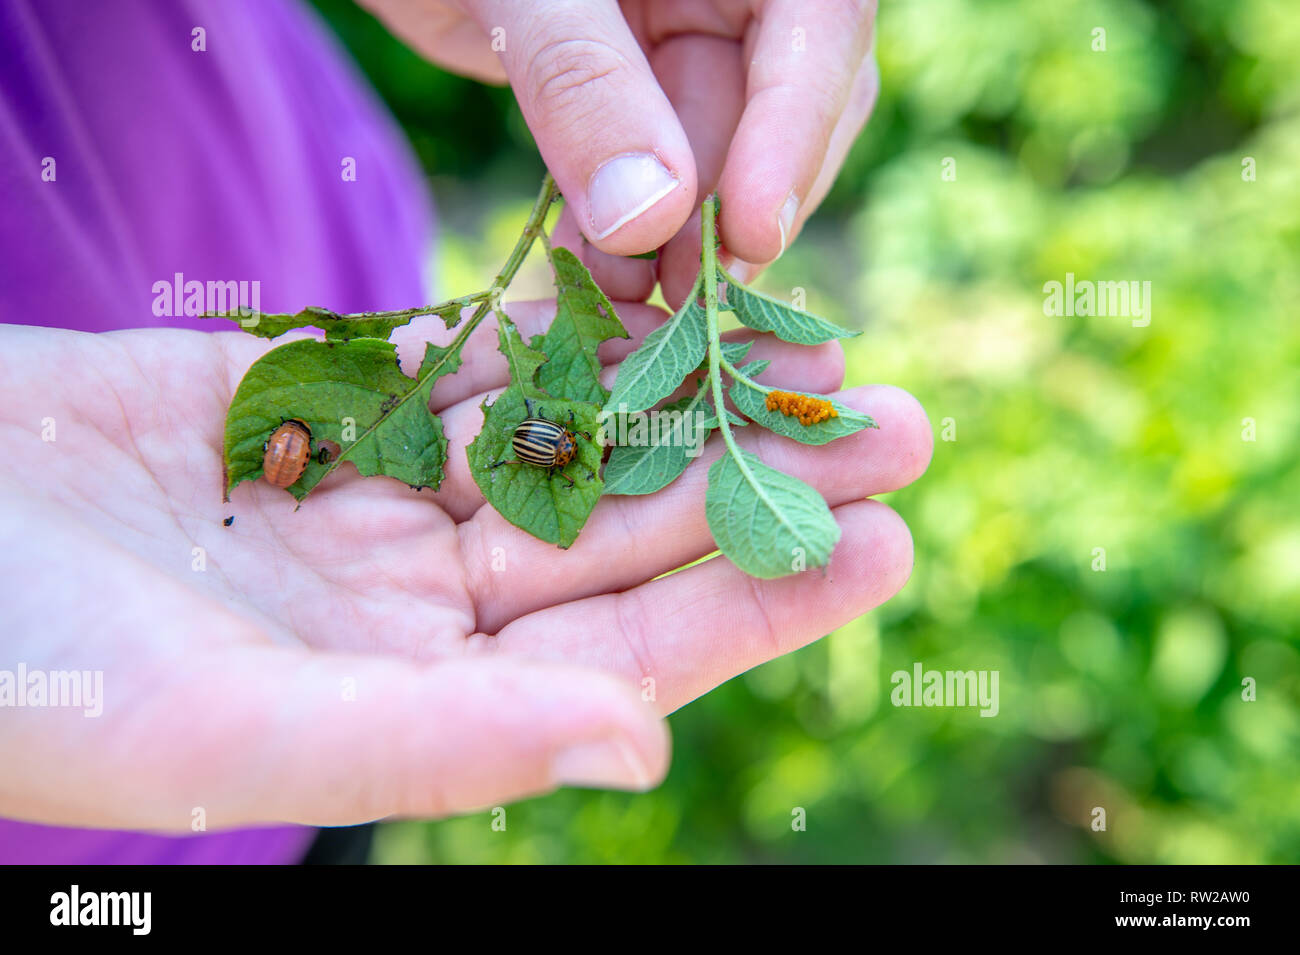 Hand holding leaves with the three life stages, eggs, larvae and mature, of a of a Colorado potato beetle (Leptinotarsa decemlineata), Sieradz, Łódź V Stock Photo